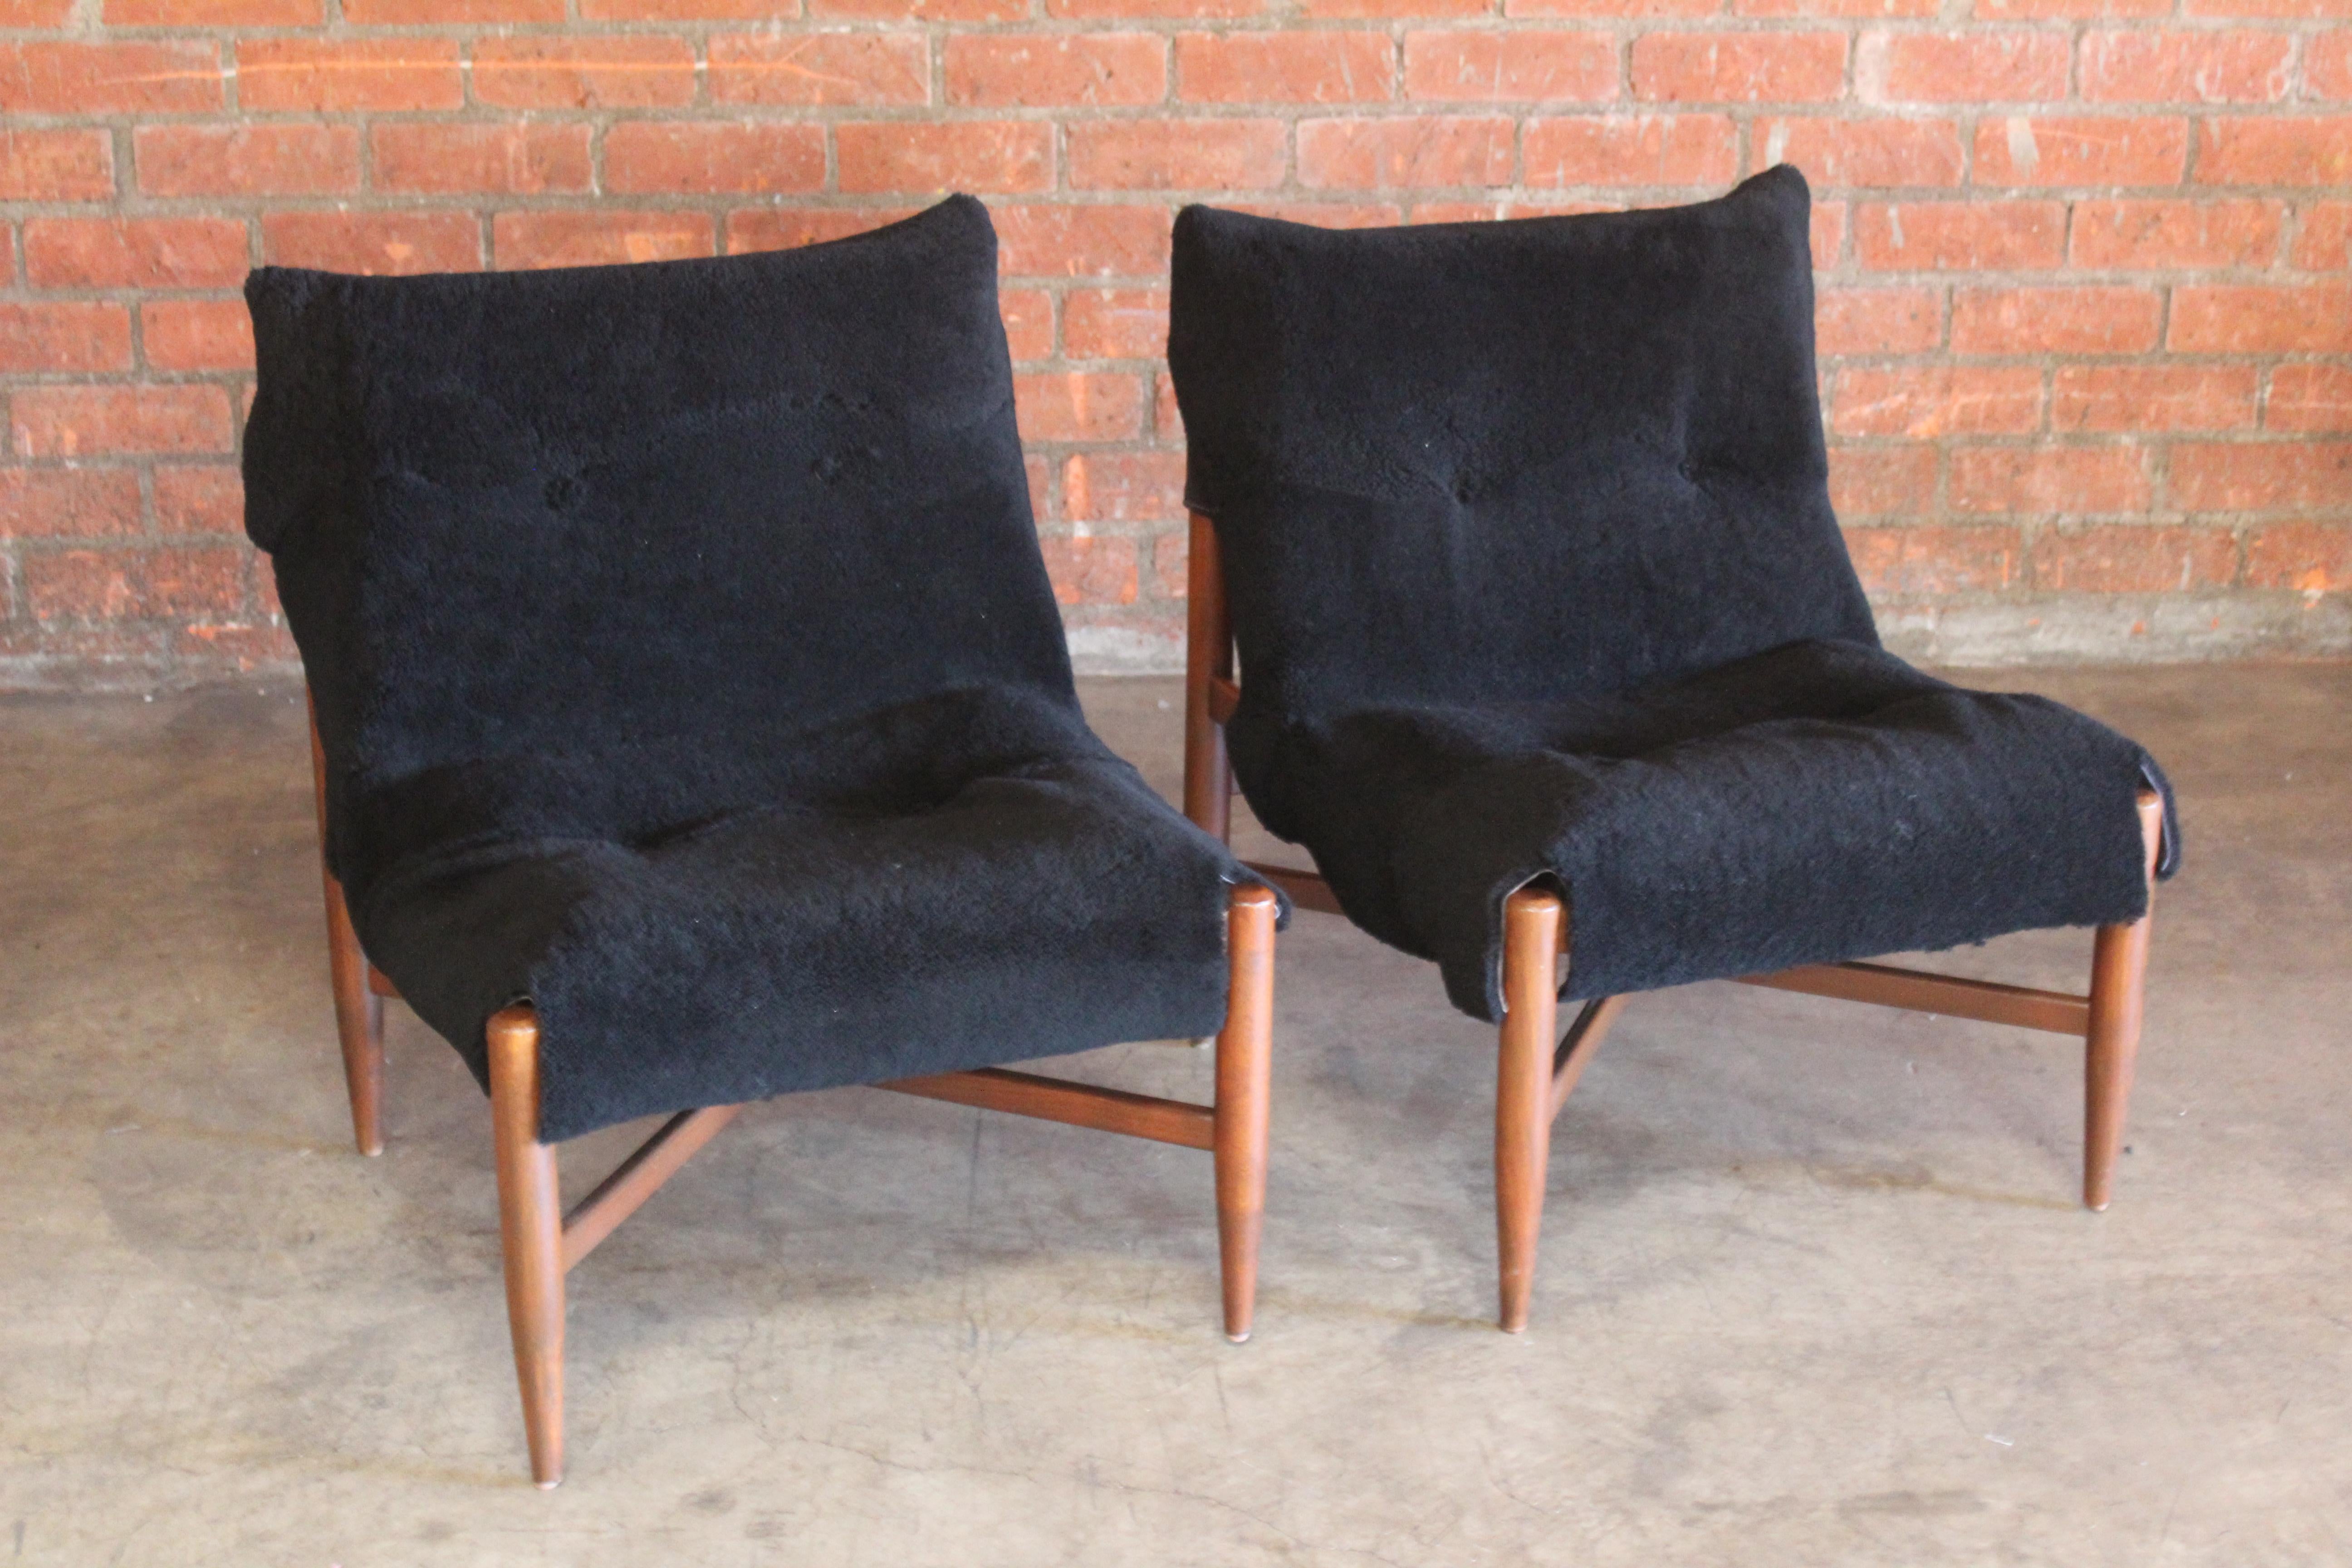 Pair of Danish 1960s slipper chairs with new suede slings and black sheepskin upholstered cushions. The sheepskin drape over new linen cushions. The beech wood frames have been refinished. The pair are in excellent condition.